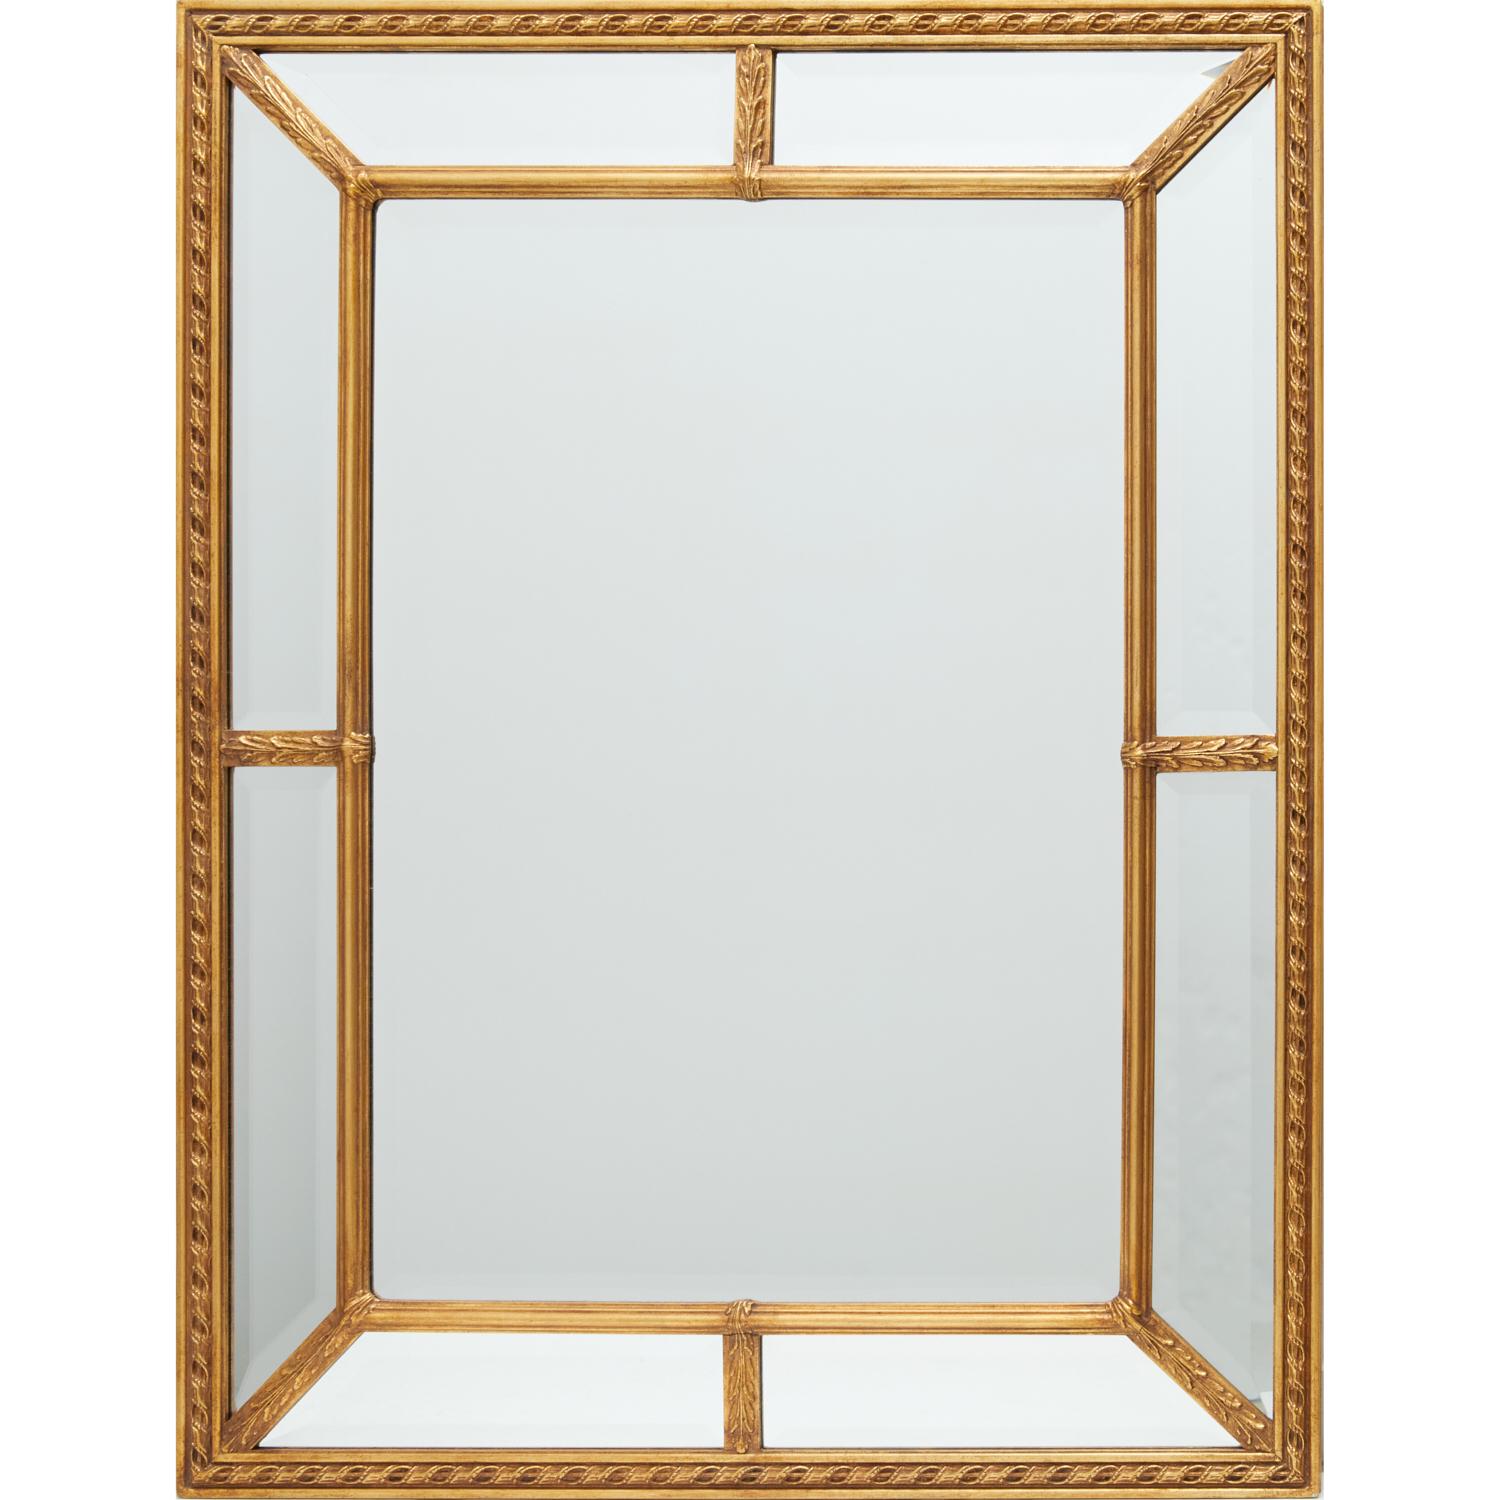 20th Century 20th C. Carvers' Guild Regency Double Rectangle Mirror #1204 Antiqued Gold Leaf For Sale